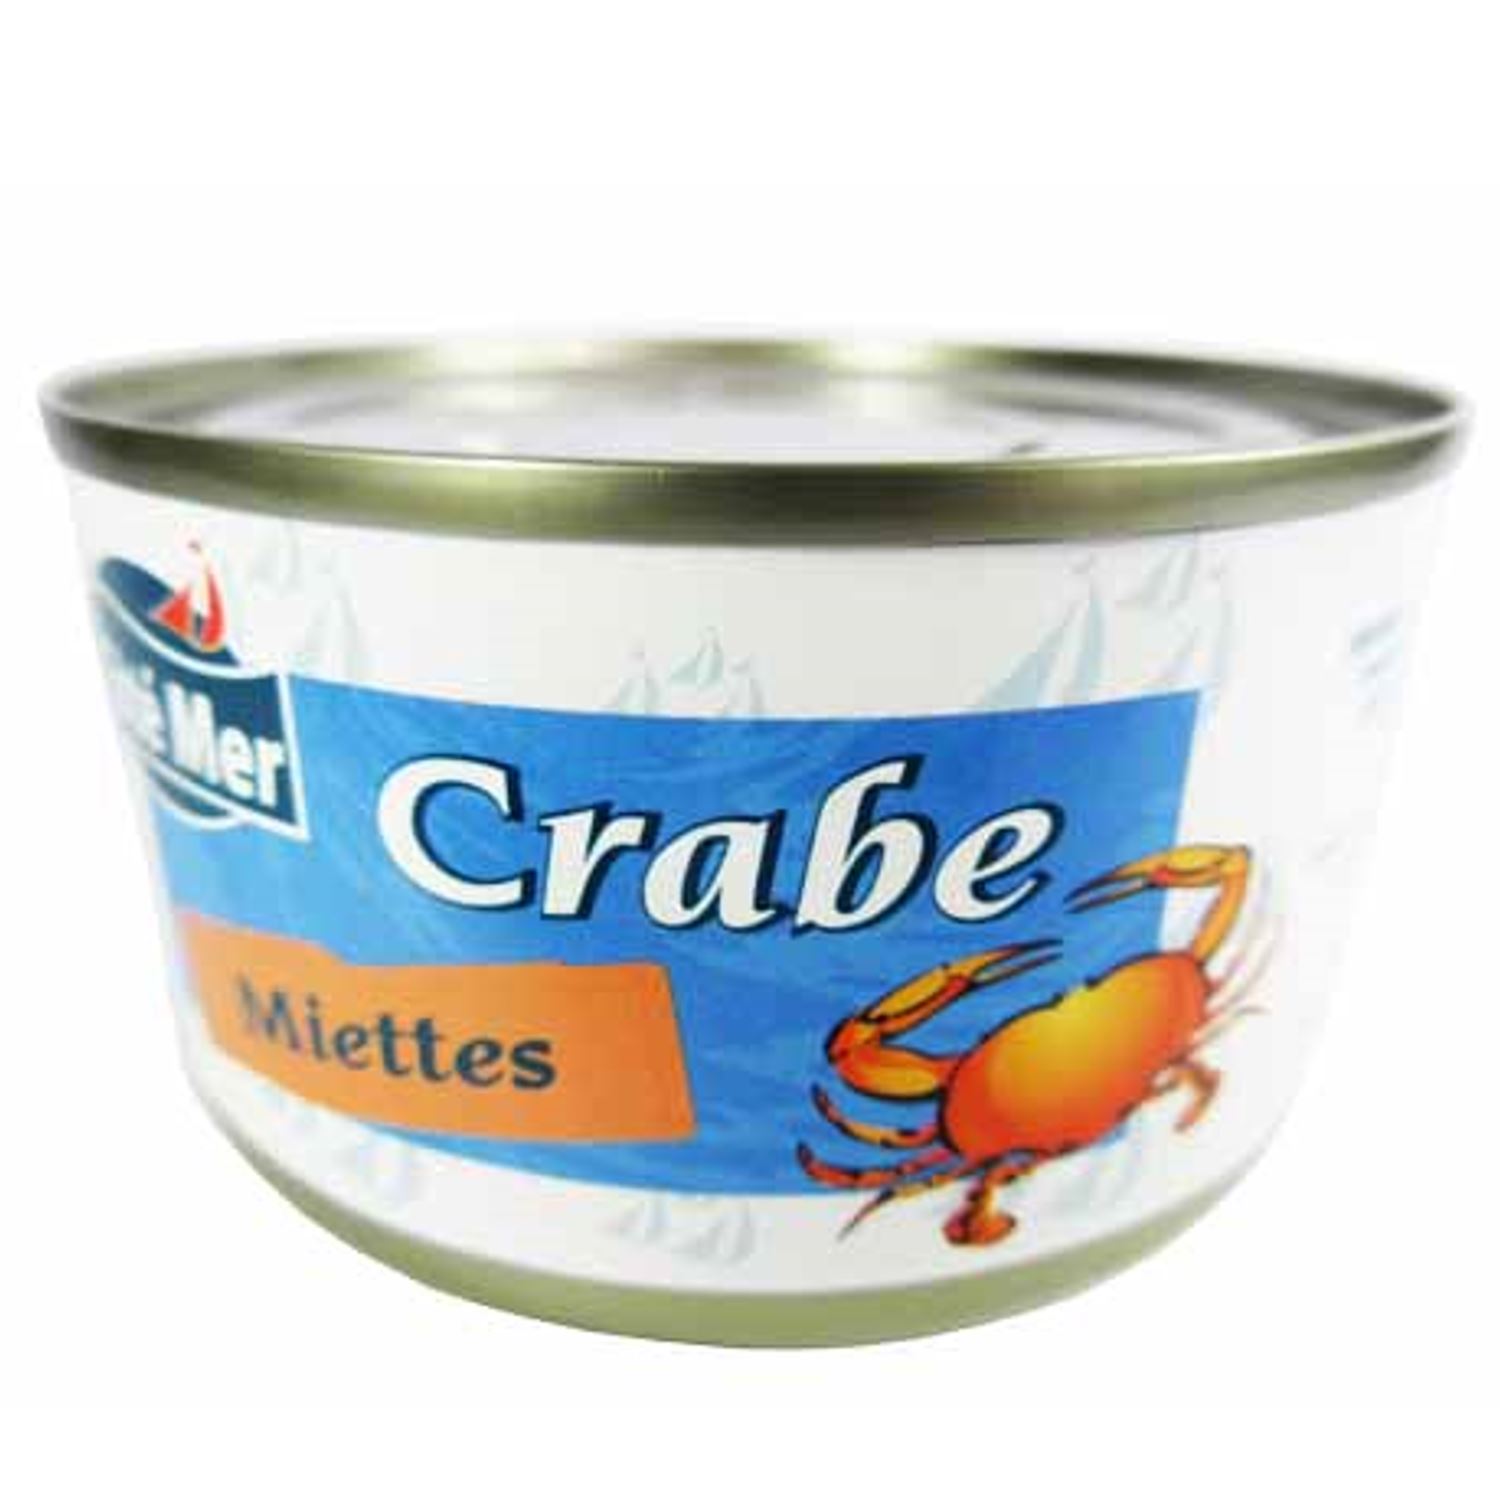 1x4 crabe 20% patte